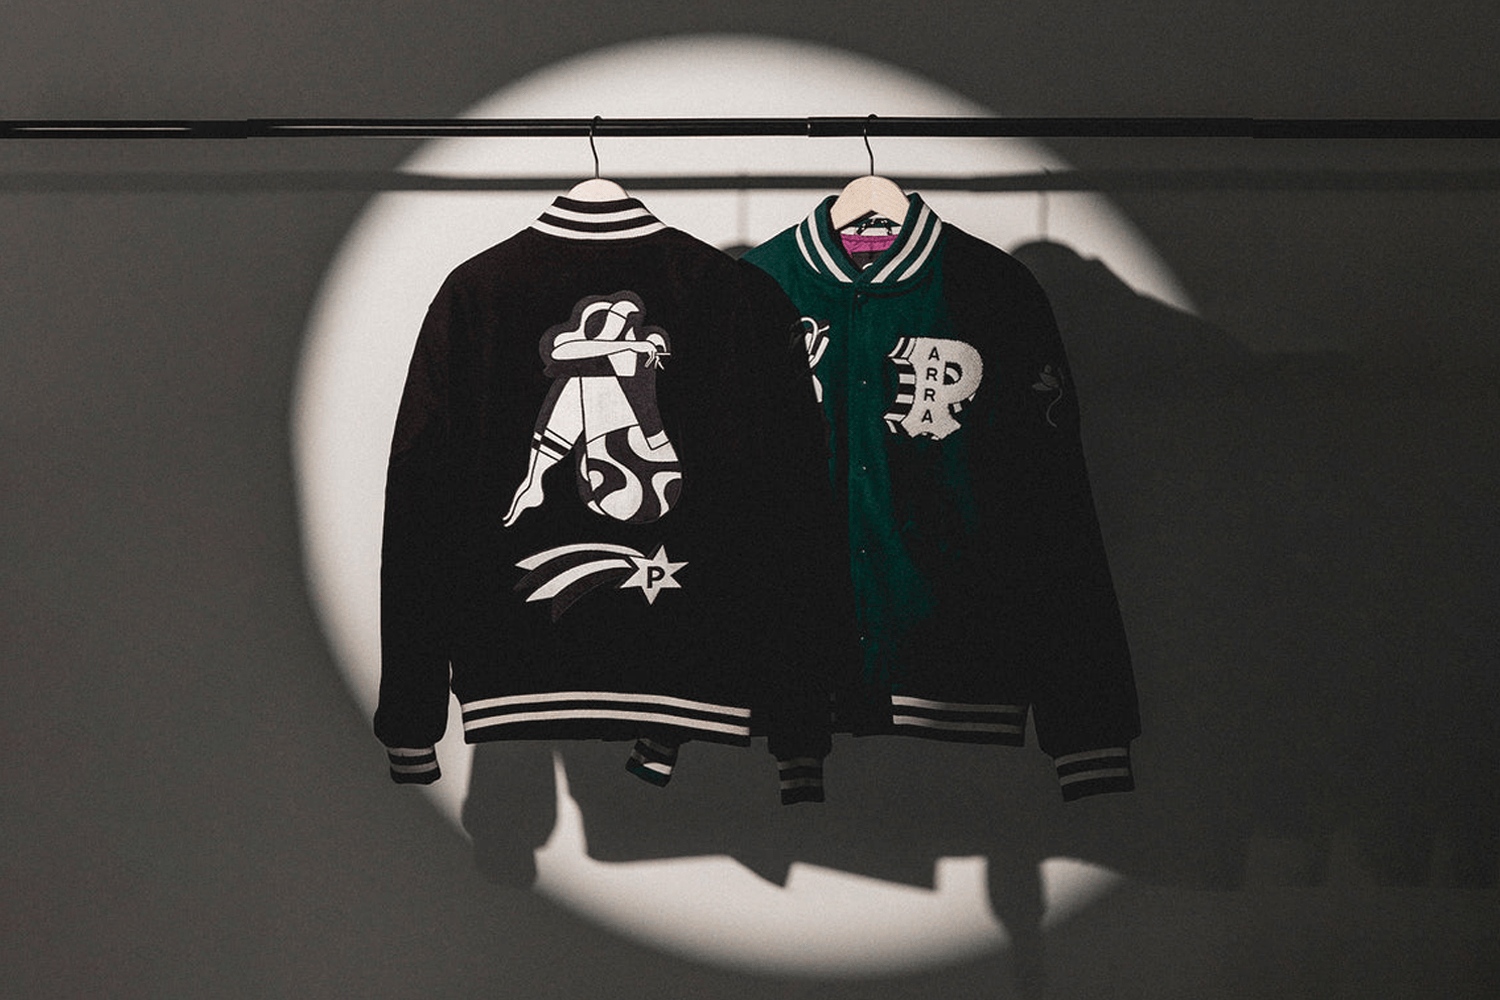 Some of the coolest varsity jackets on the market right now